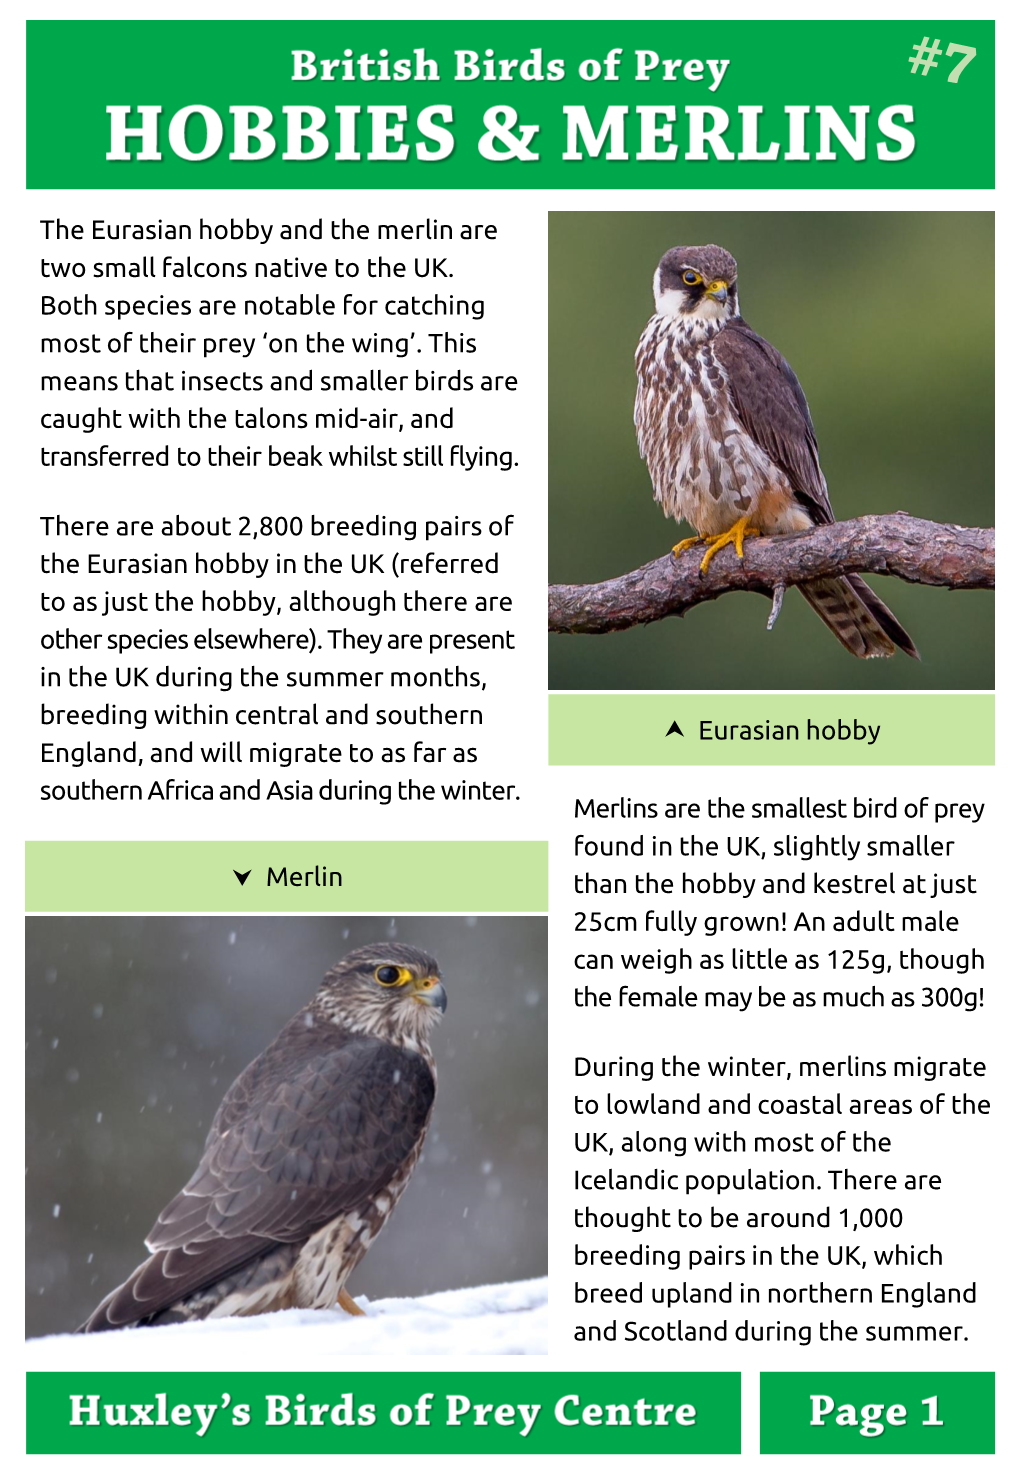 The Eurasian Hobby and the Merlin Are Two Small Falcons Native to the UK